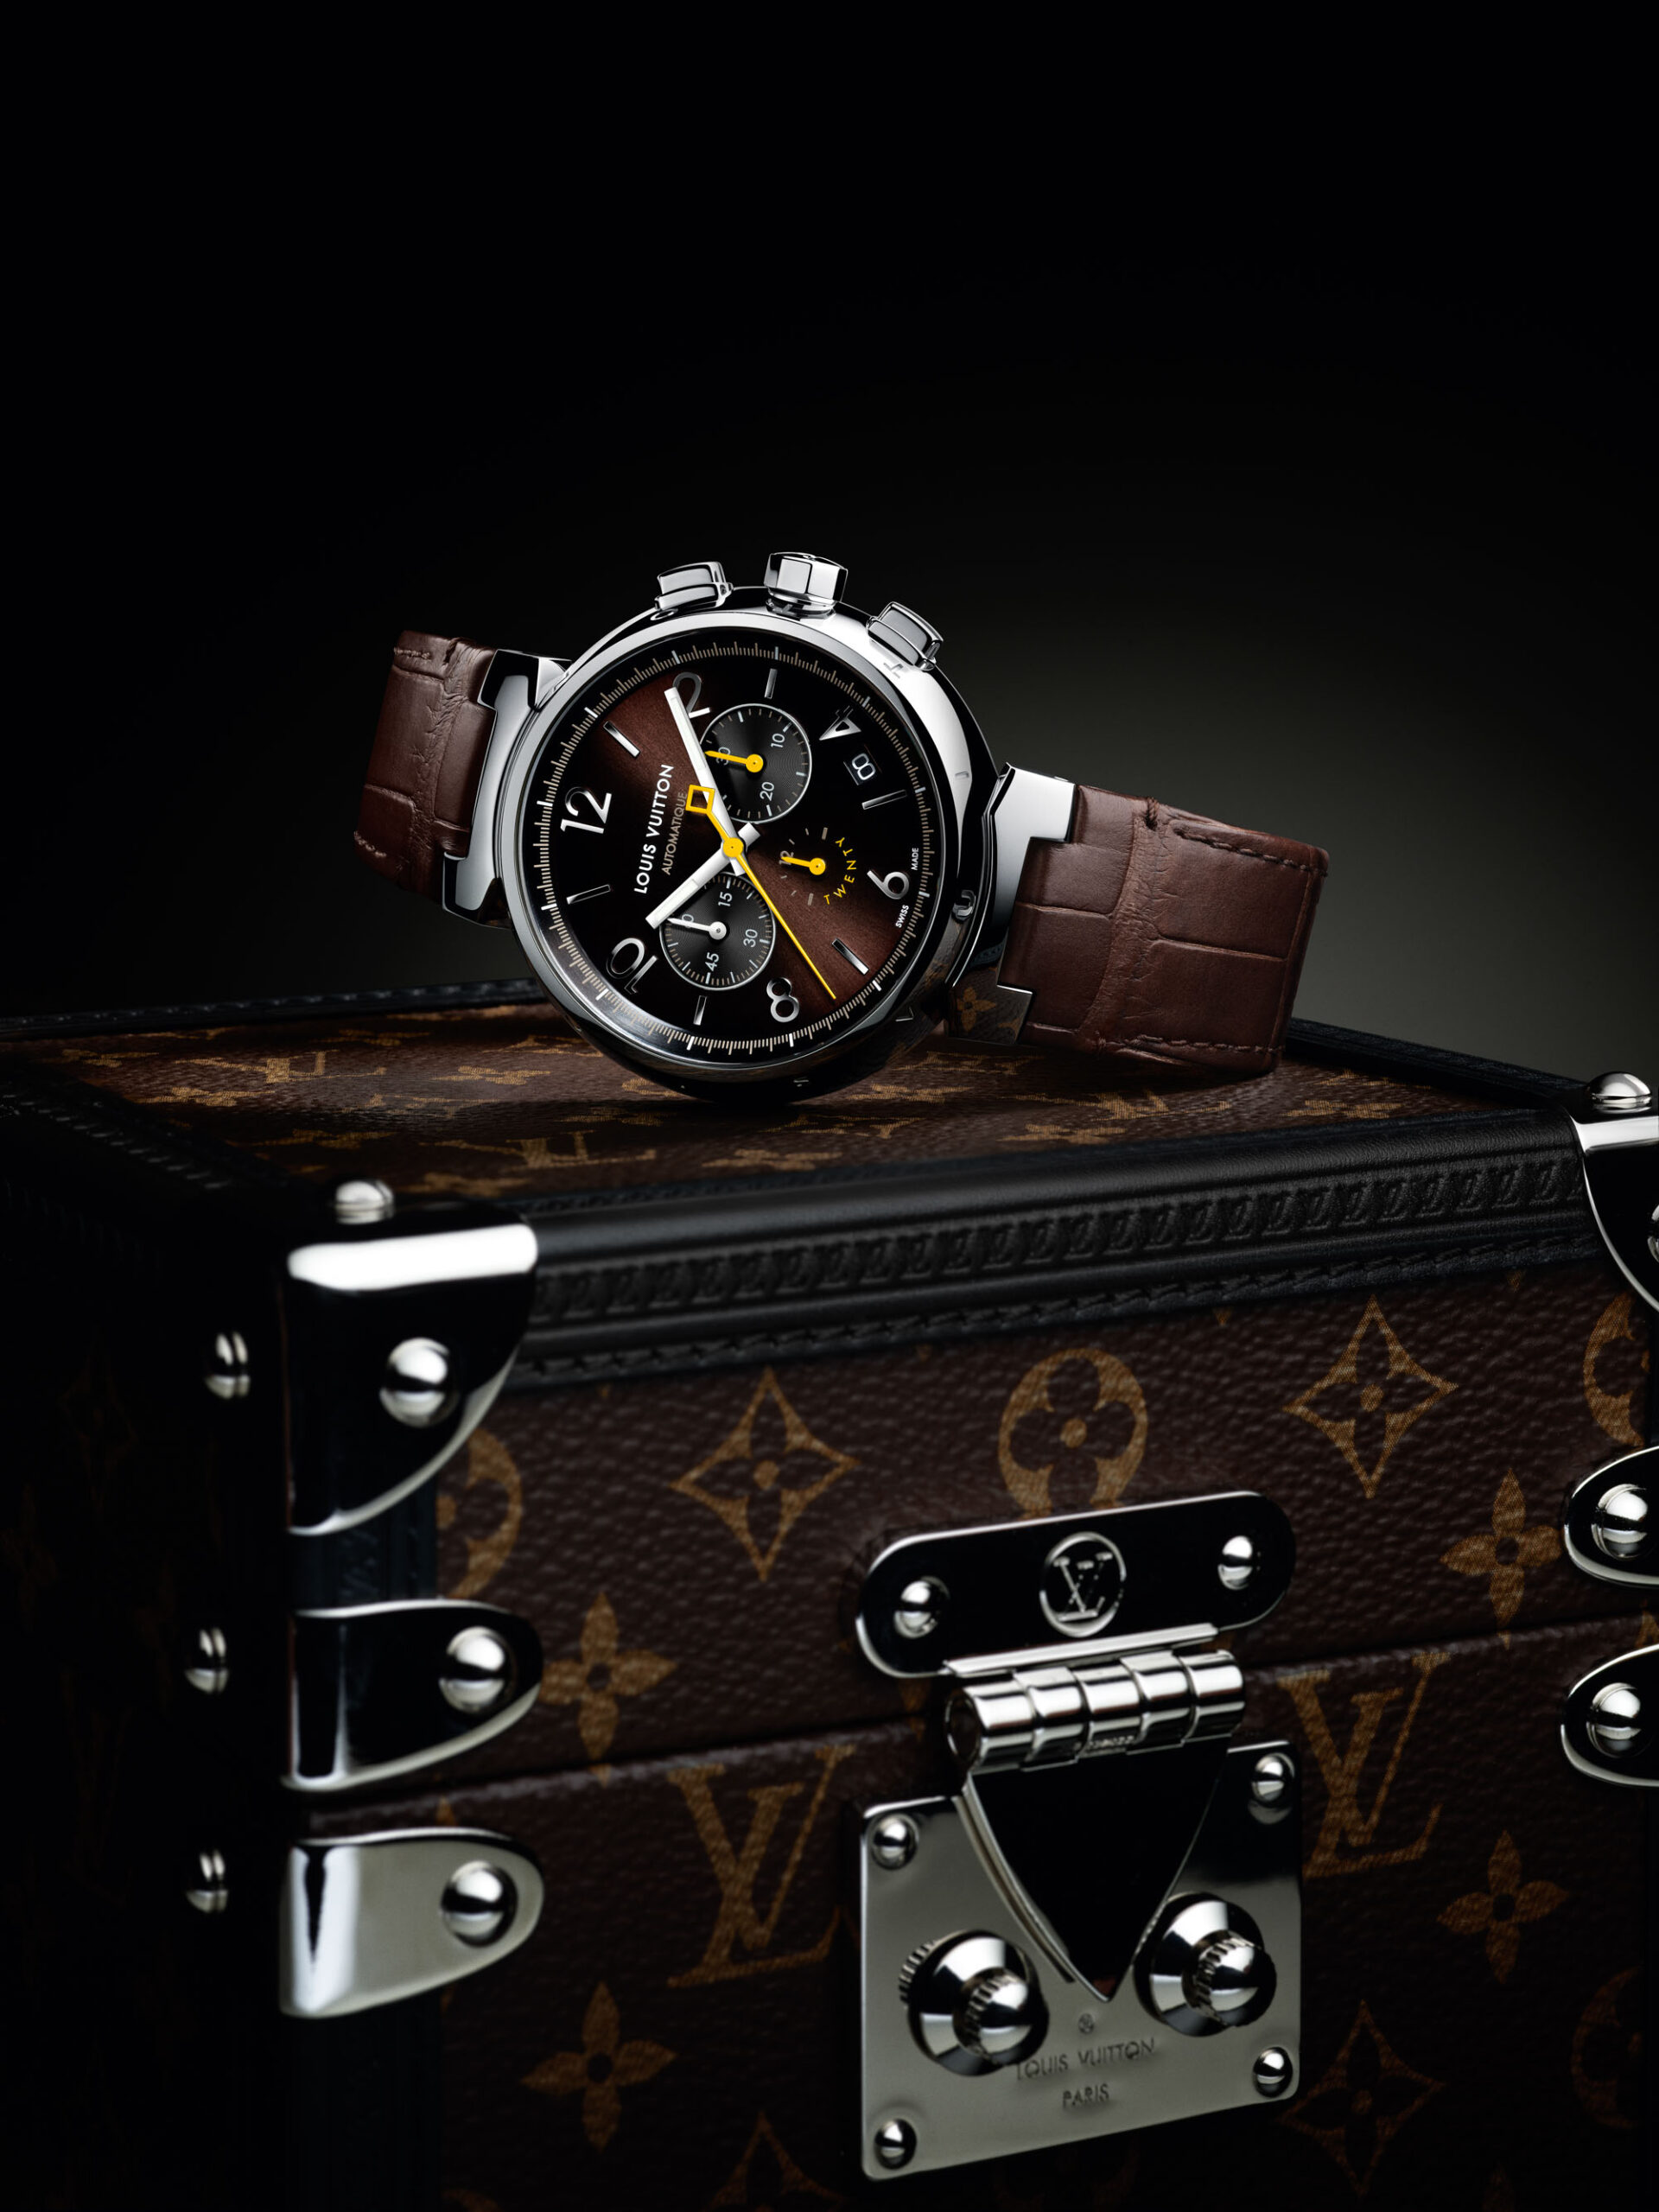 Louis Vuitton Tambour Twenty Limited Edition - Hands-On Review, Price